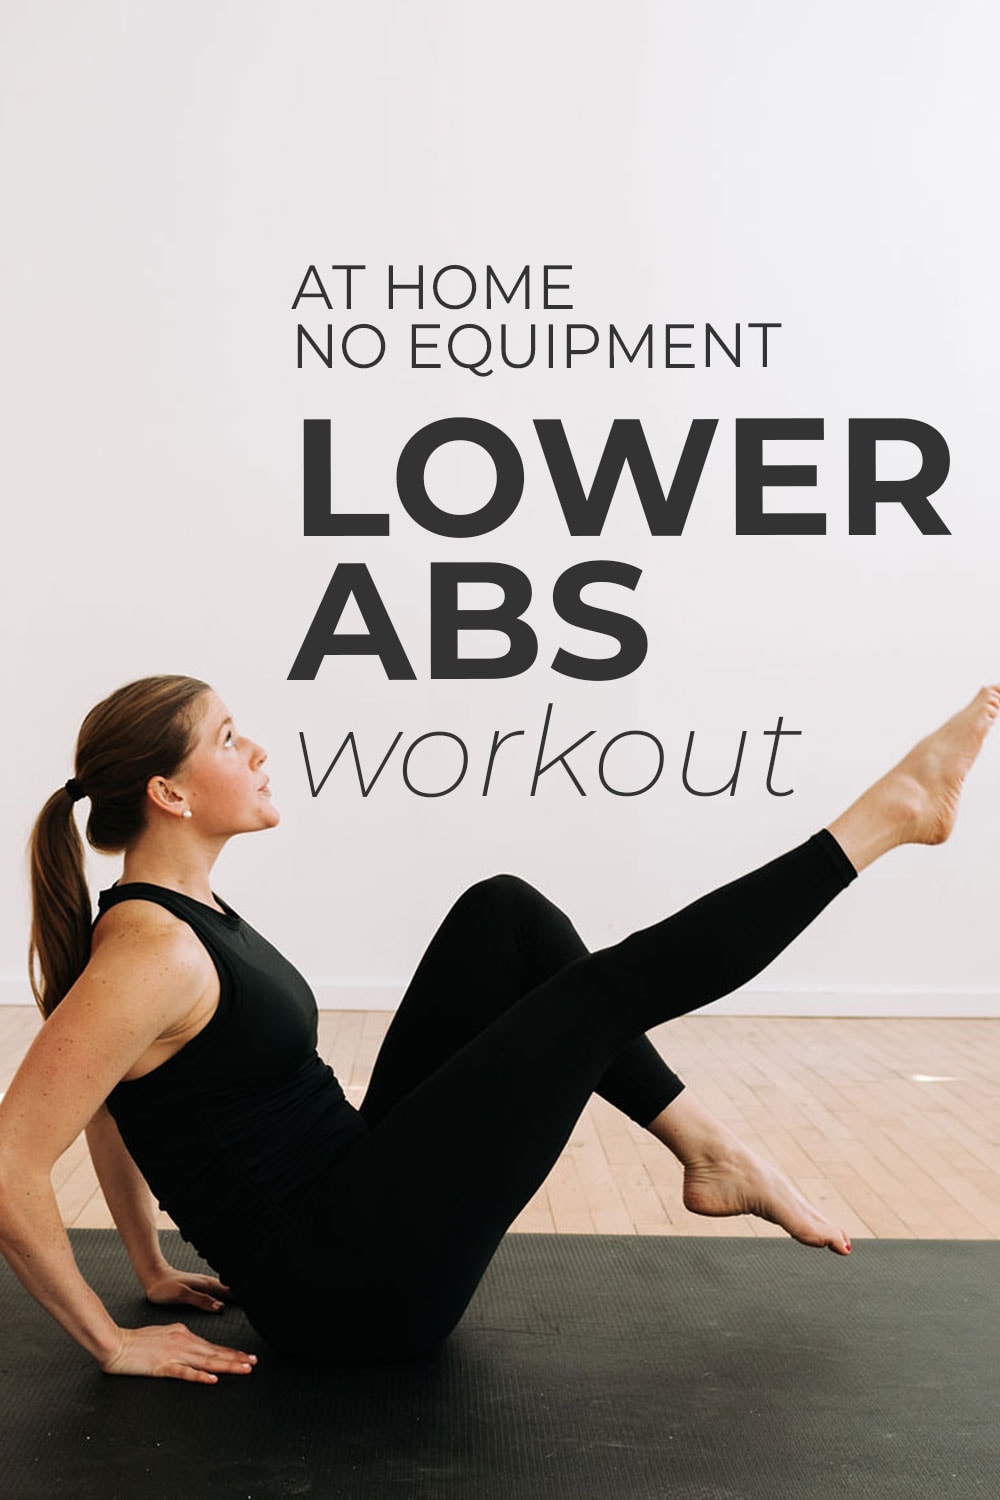 Minute Home Lower Ab Workout Benefits Training Guide Photos